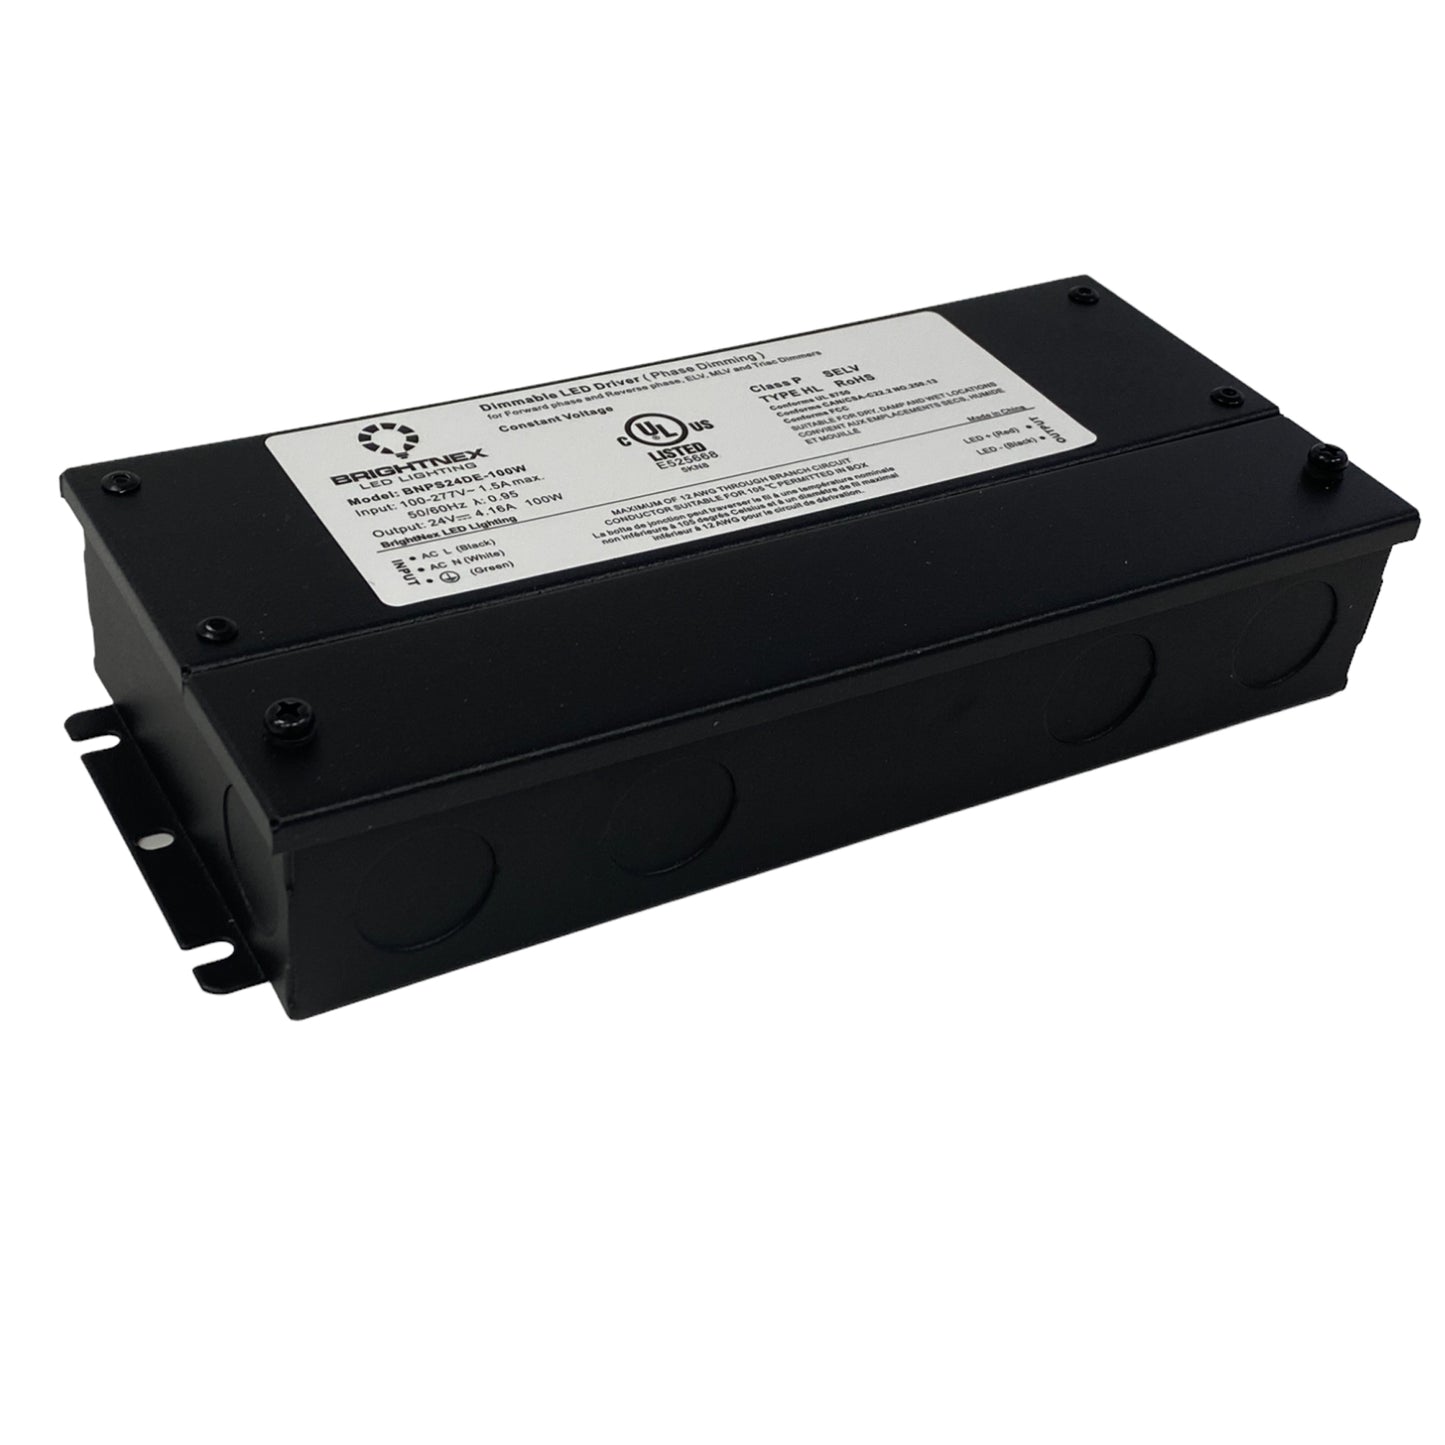 DIMMABLE TRANSFORMER (LED Driver), 24V, 100W